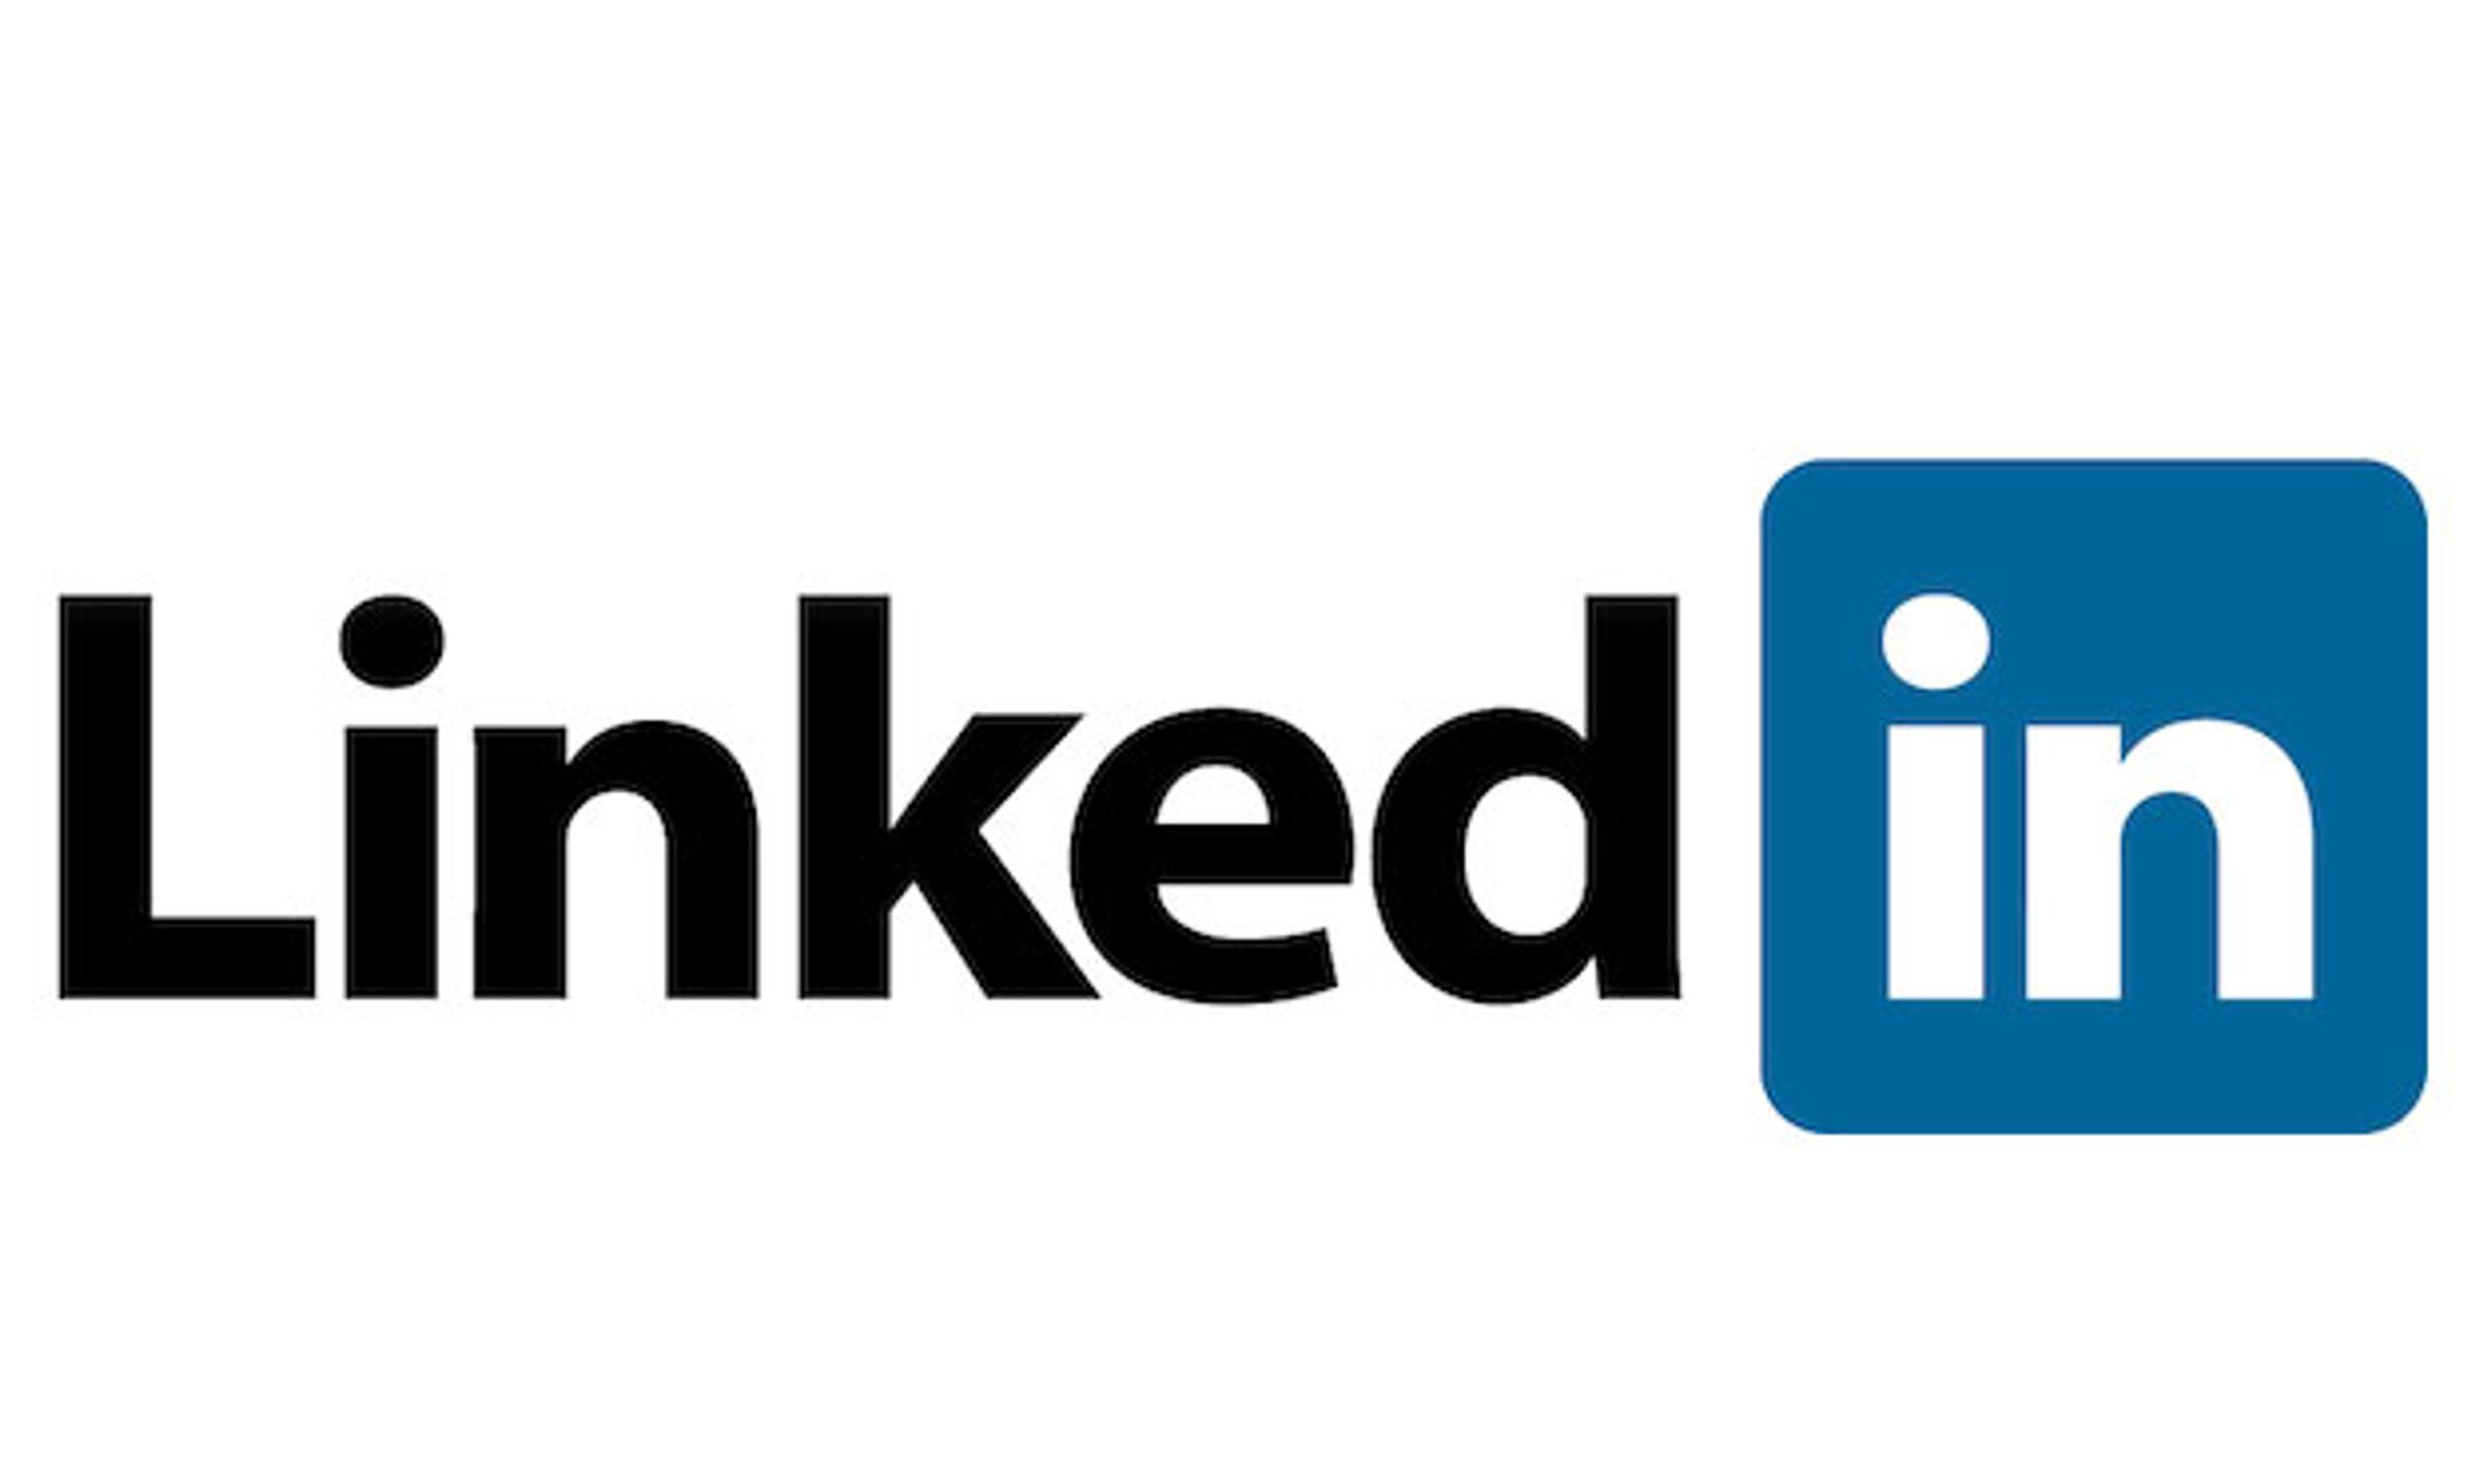 This Week in Cybercrime: Judge Upholds LinkedIn's "If You Put It on Our Site, Don't Blame Us If It Gets Out"